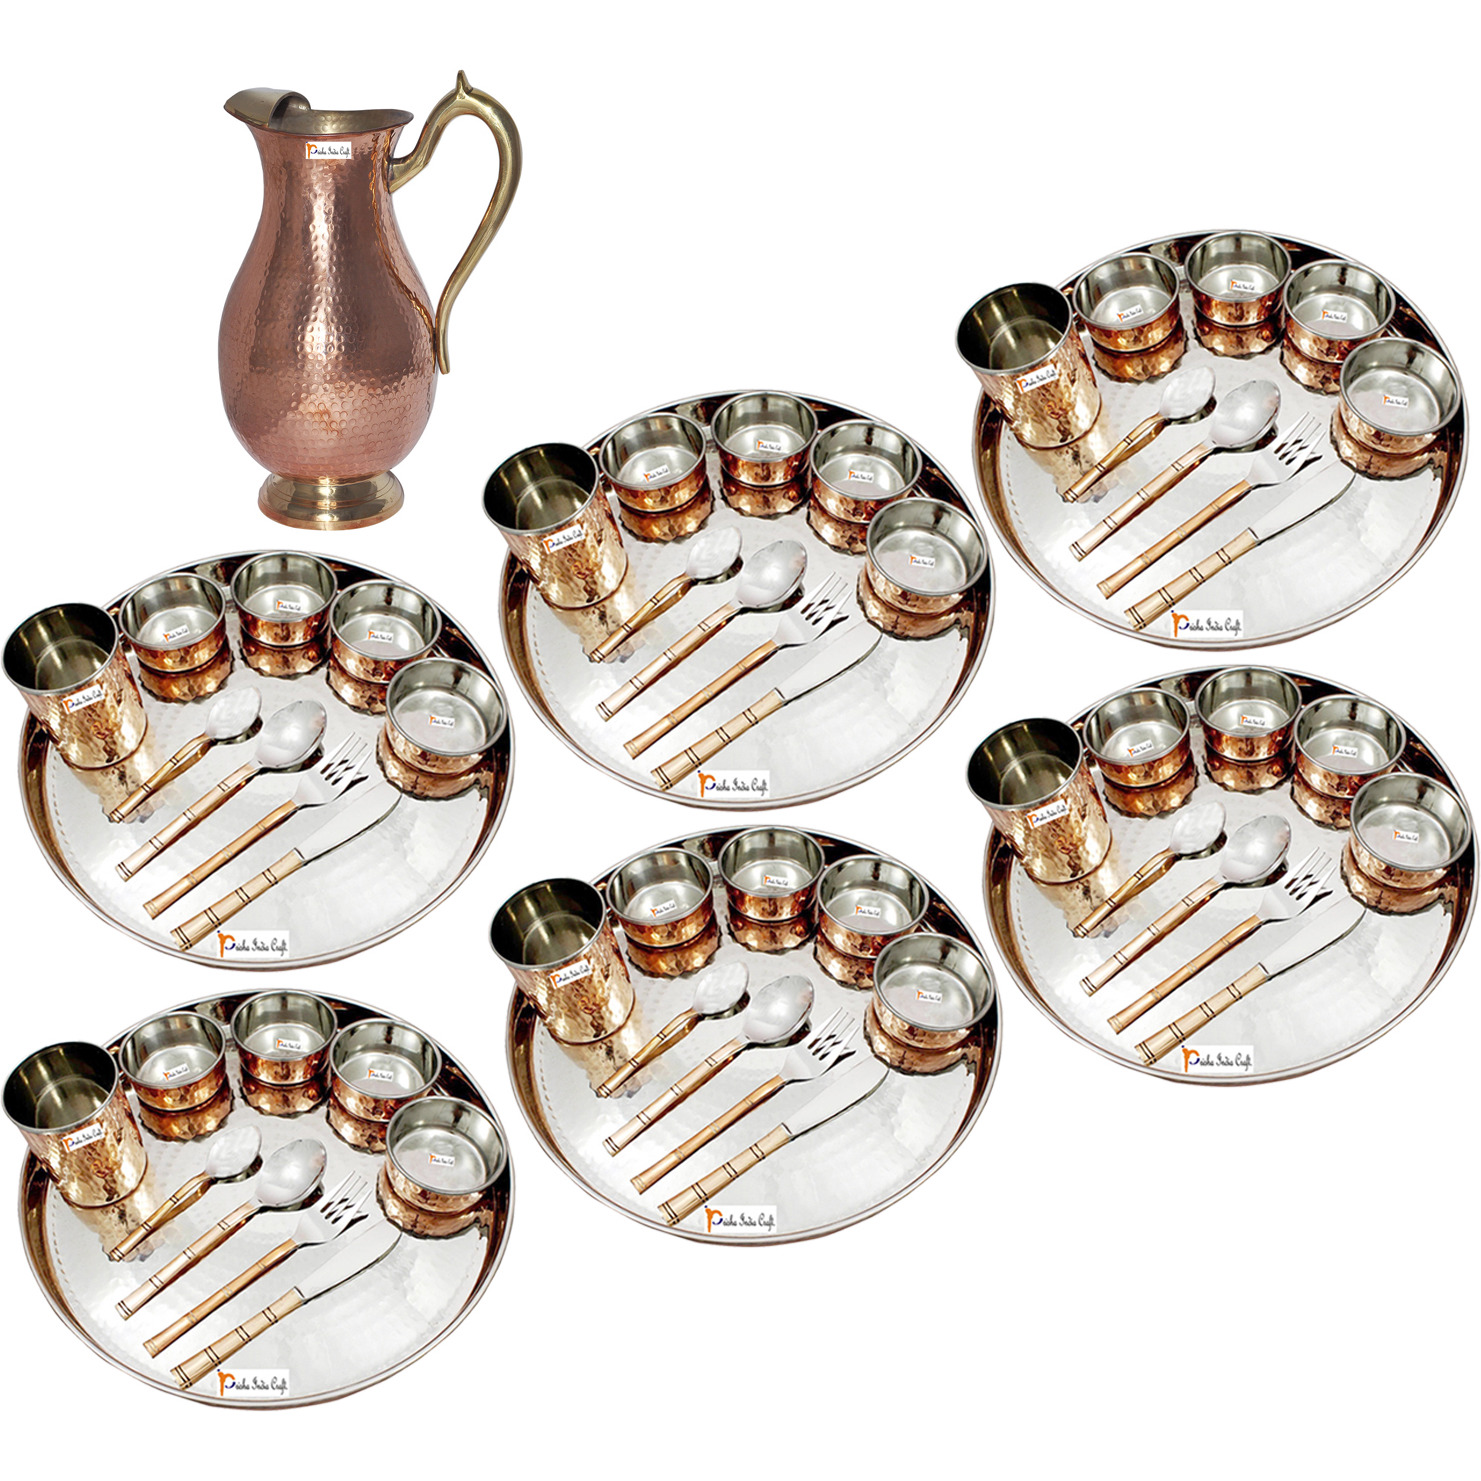 Prisha India Craft B. Set of 6 Dinnerware Traditional Stainless Steel Copper Dinner Set of Thali Plate, Bowls, Glass and Spoons, Dia 13  With 1 Pure Copper Mughal Pitcher Jug - Christmas Gift